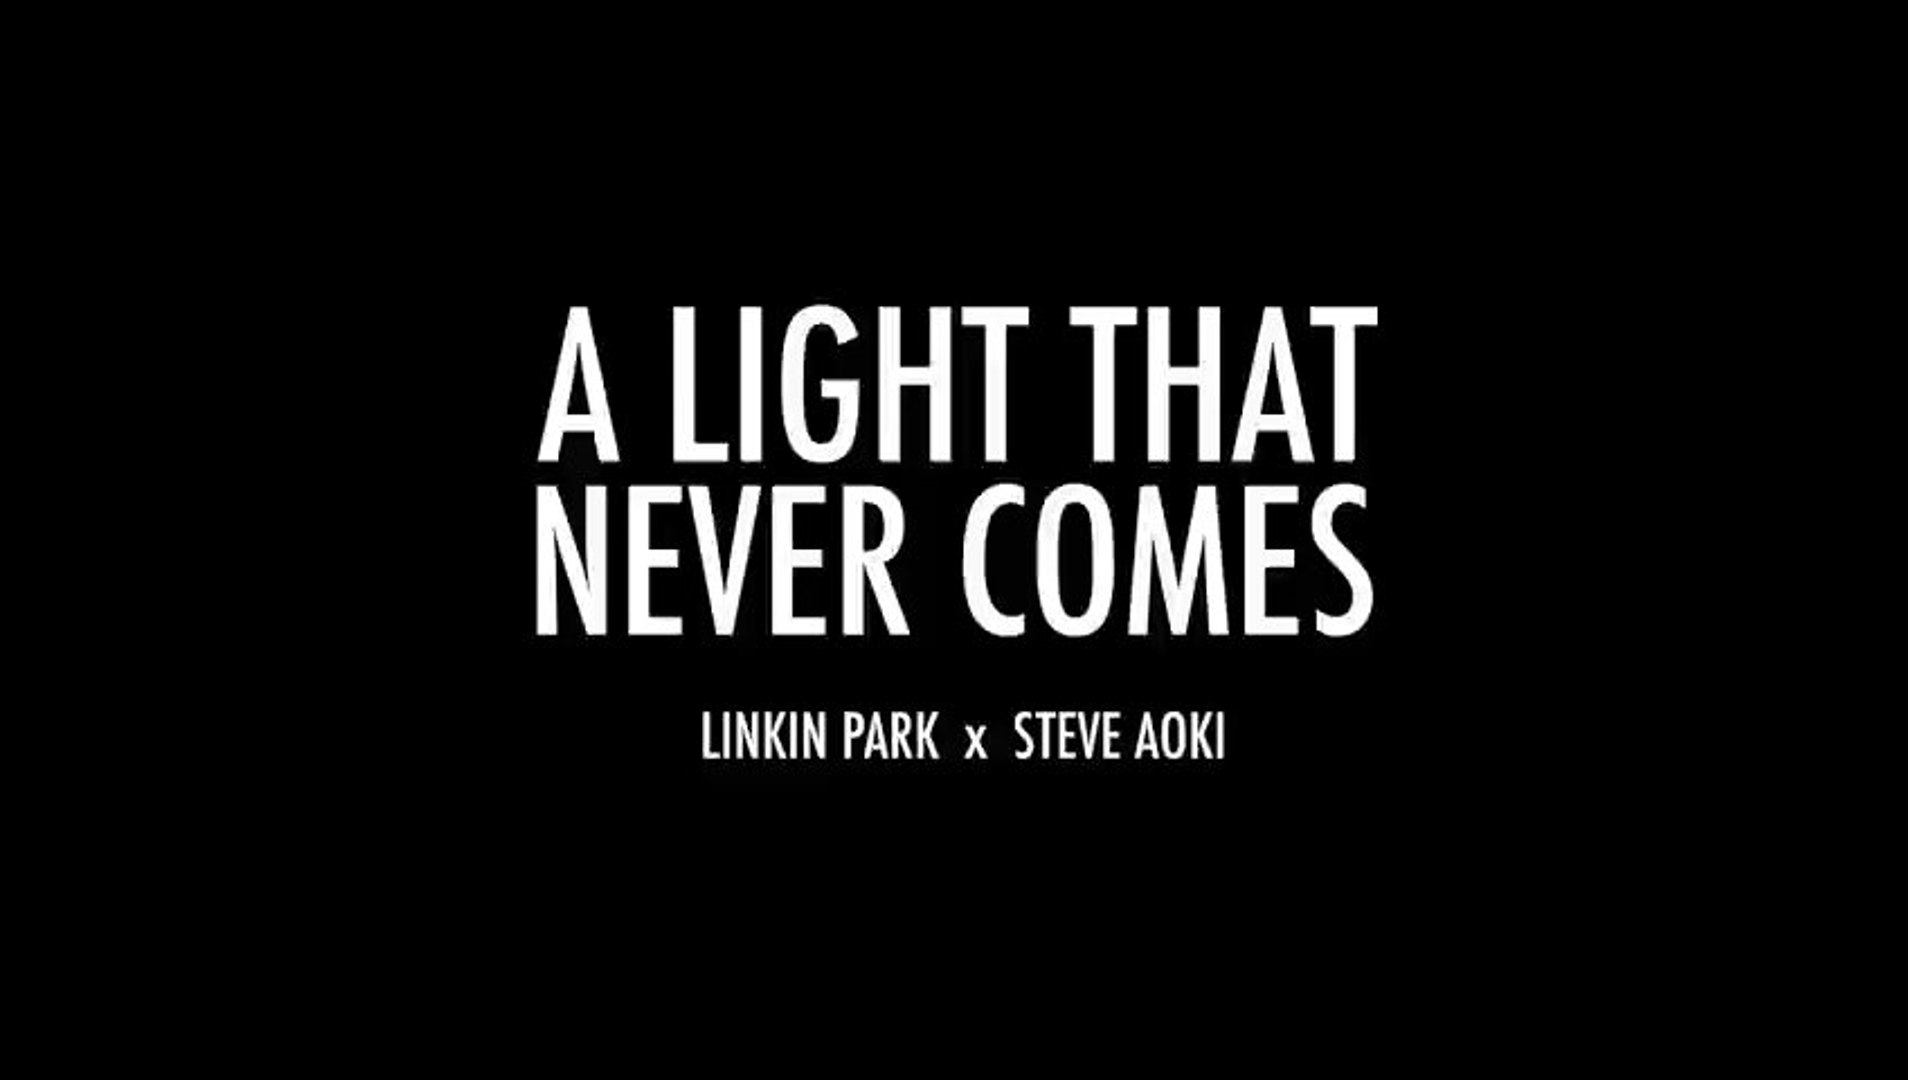 LINKIN PARK x STEVE AOKI - A LIGHT THAT NEVER COMES Official Lyric Video  (FULL SONG) (2013) - (SULEMAN - RECORD) - video Dailymotion